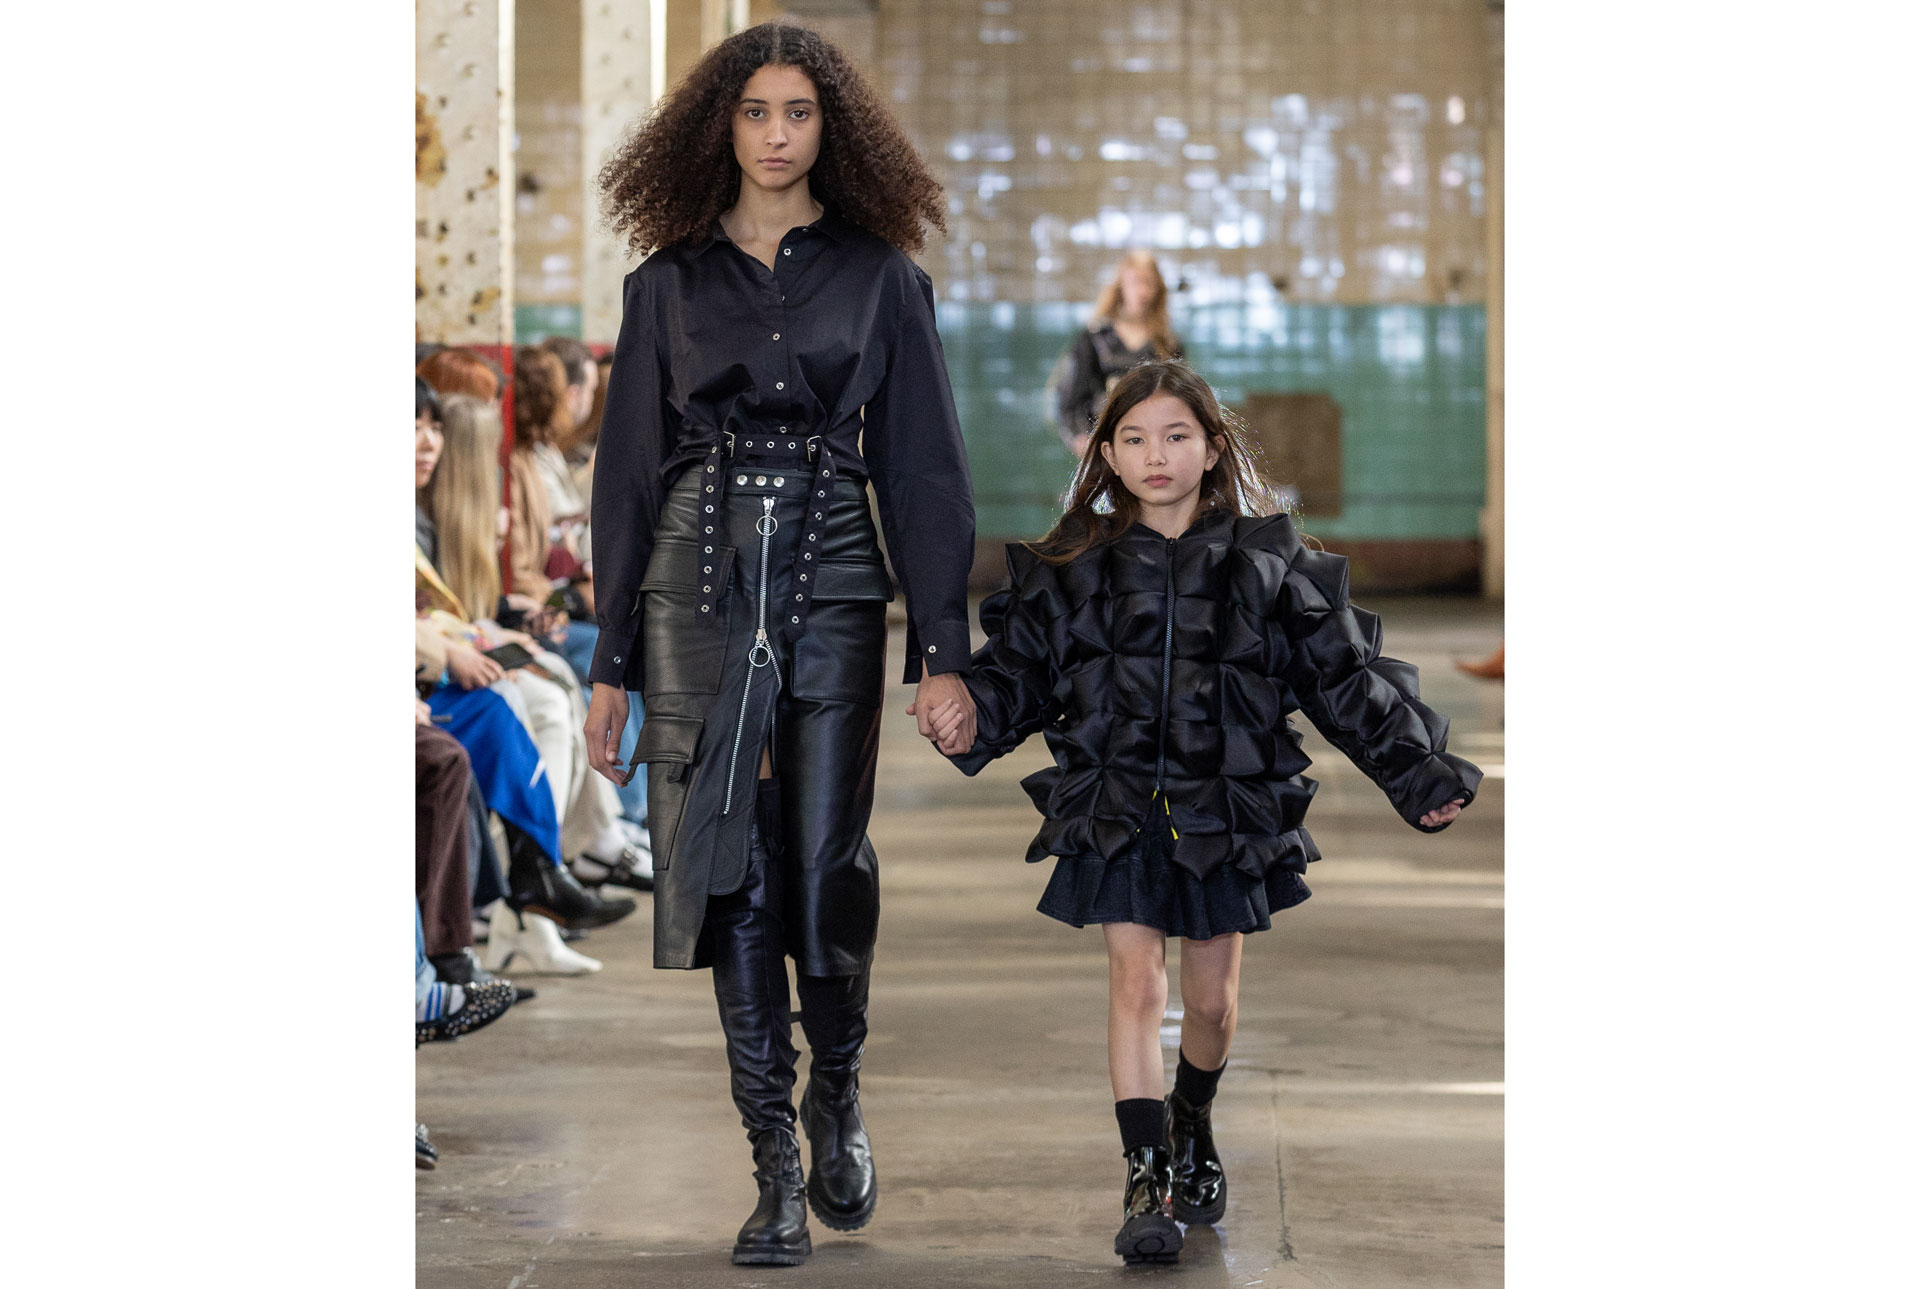 Model and child walking the catwalk in black dresses